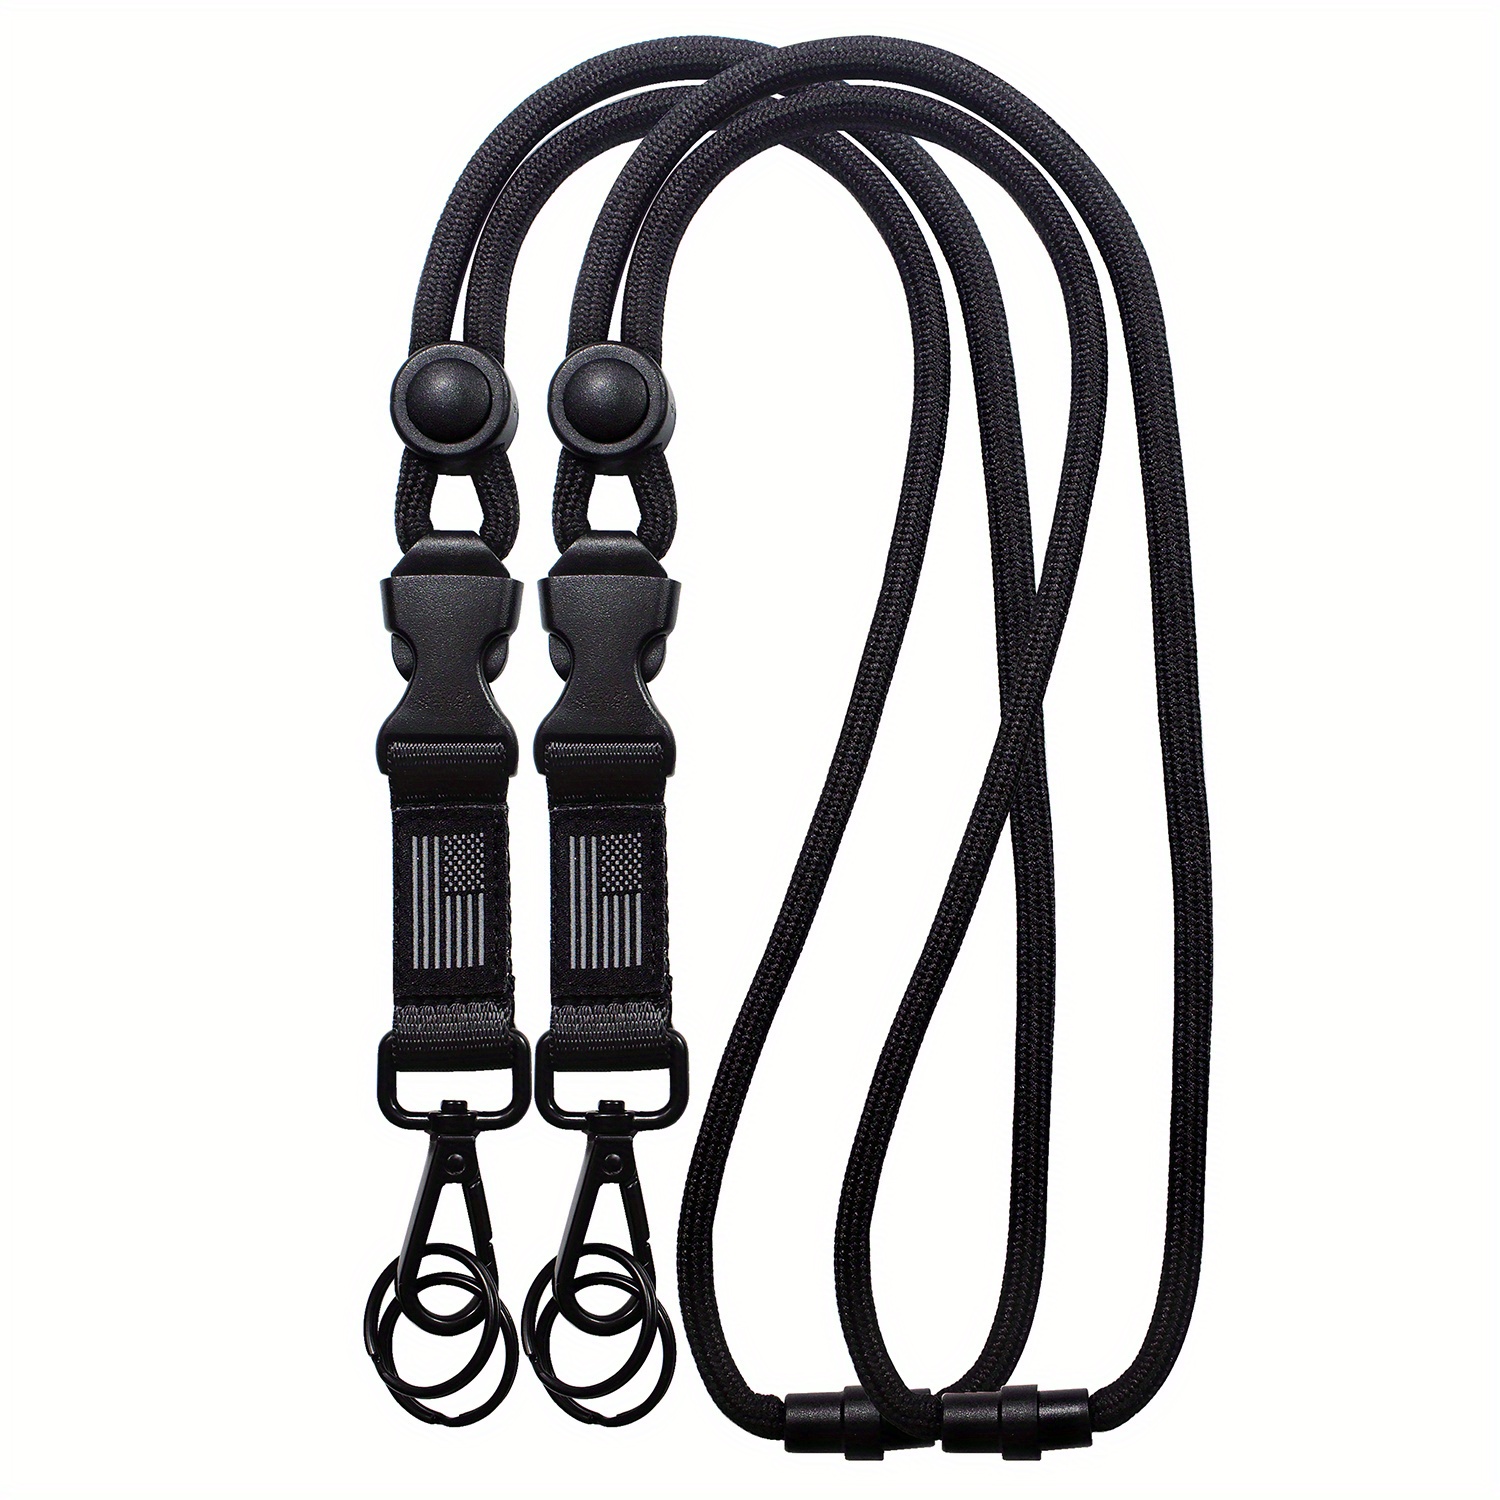 Wisdompro 2 Pack of 23 inch Durable Round Cord Heavy Duty Lanyard